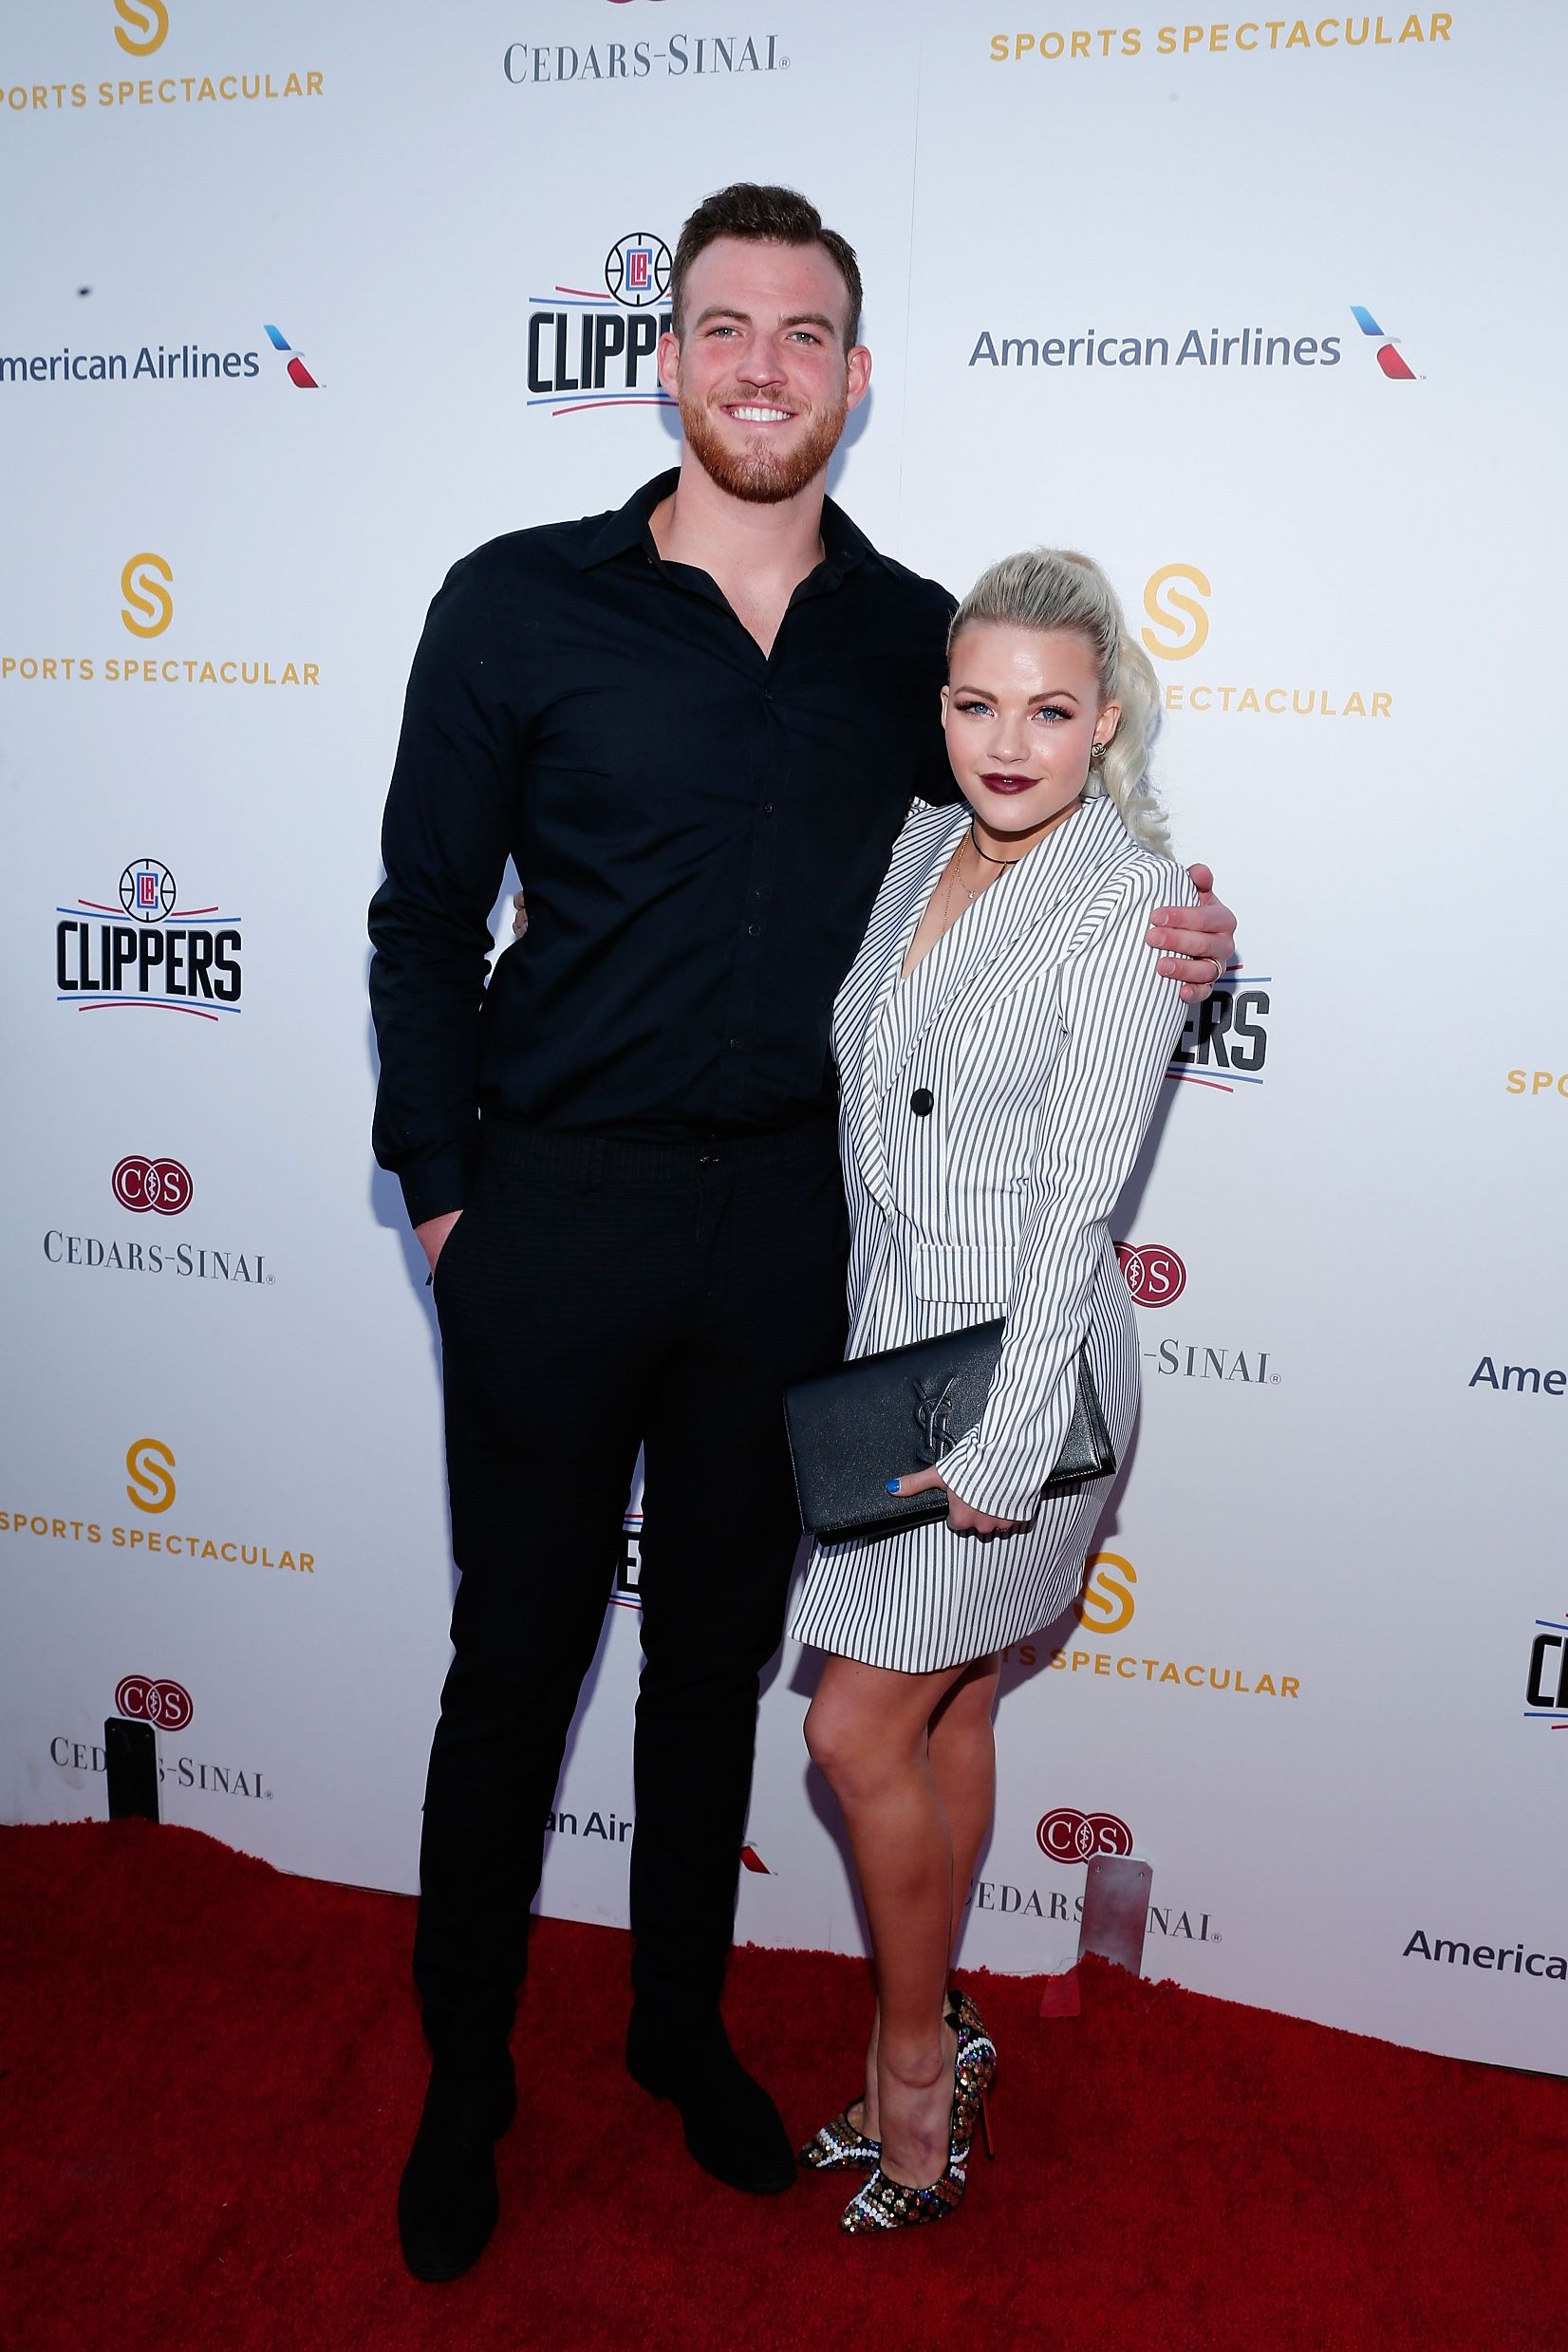 Carson McAllister and Witney Carson at the Cedars-Sinai Sports Spectacular in West Beverly Hills on March 25, 2016 | Getty Images